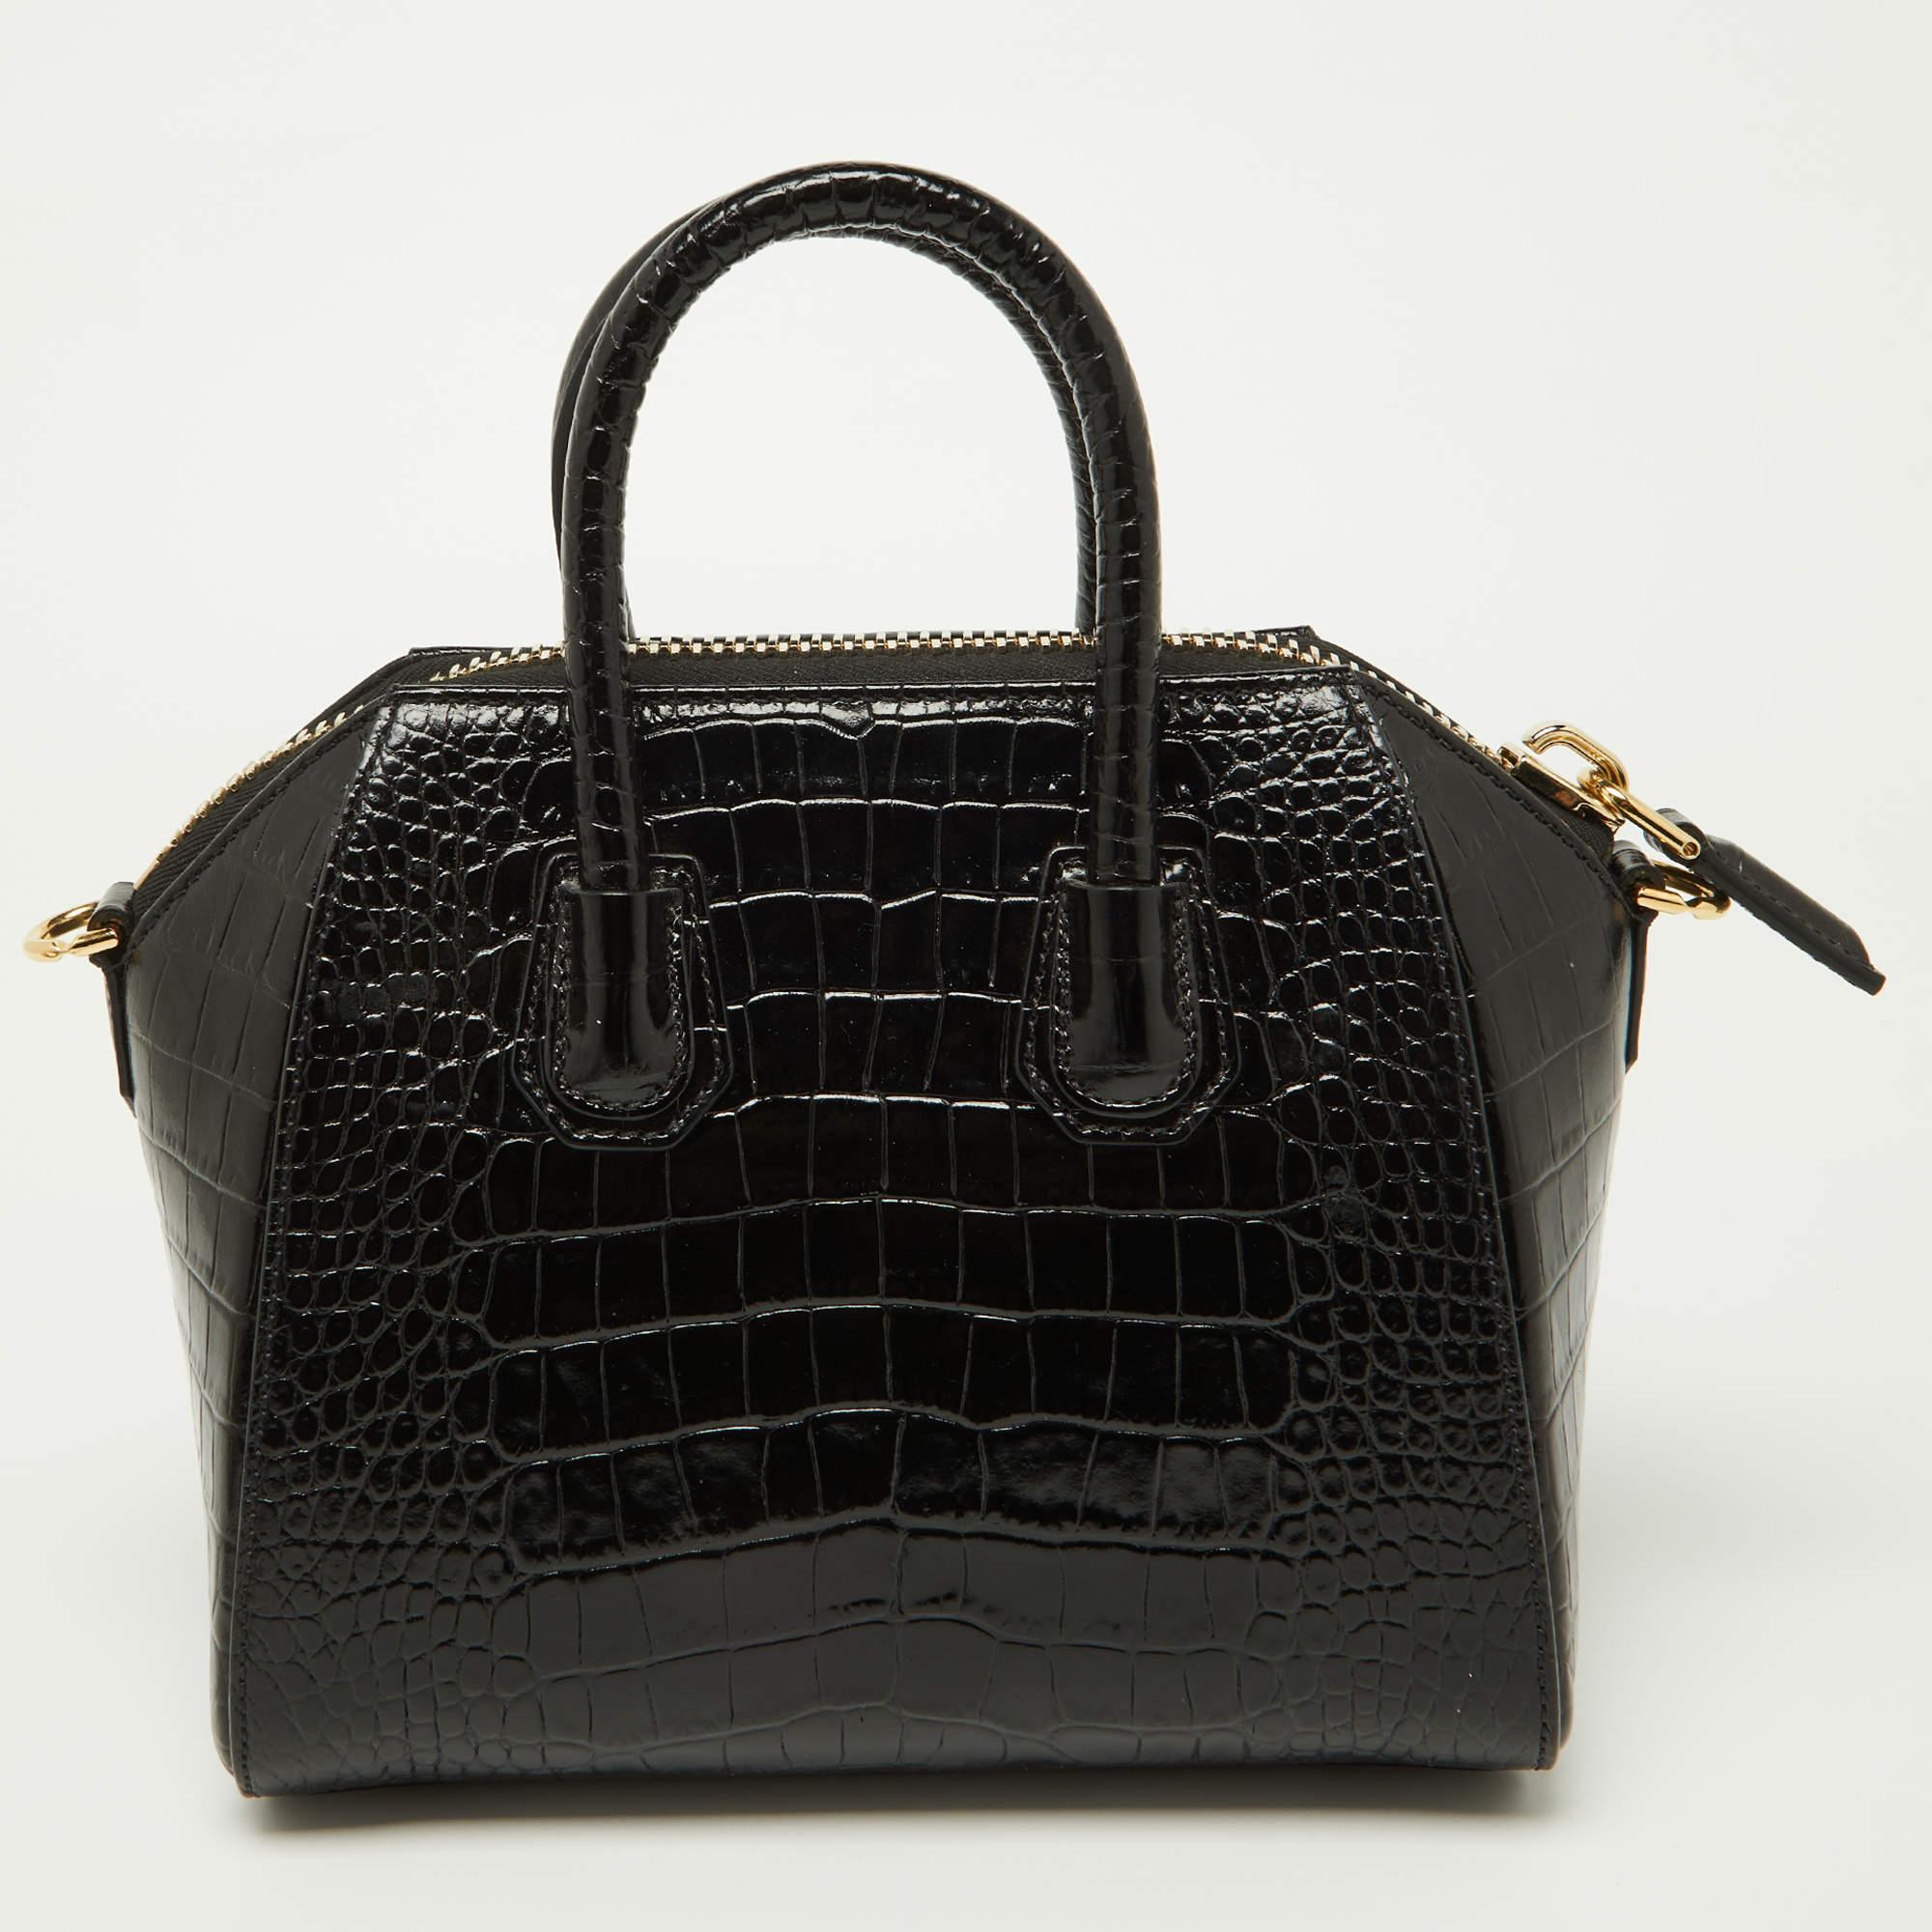 Made in Italy, and loved by women worldwide is this beautiful Antigona satchel by Givenchy. It has been crafted from croc-embossed leather and shaped elegantly. The black bag has a top zipper that reveals a canvas interior and it is held by two top